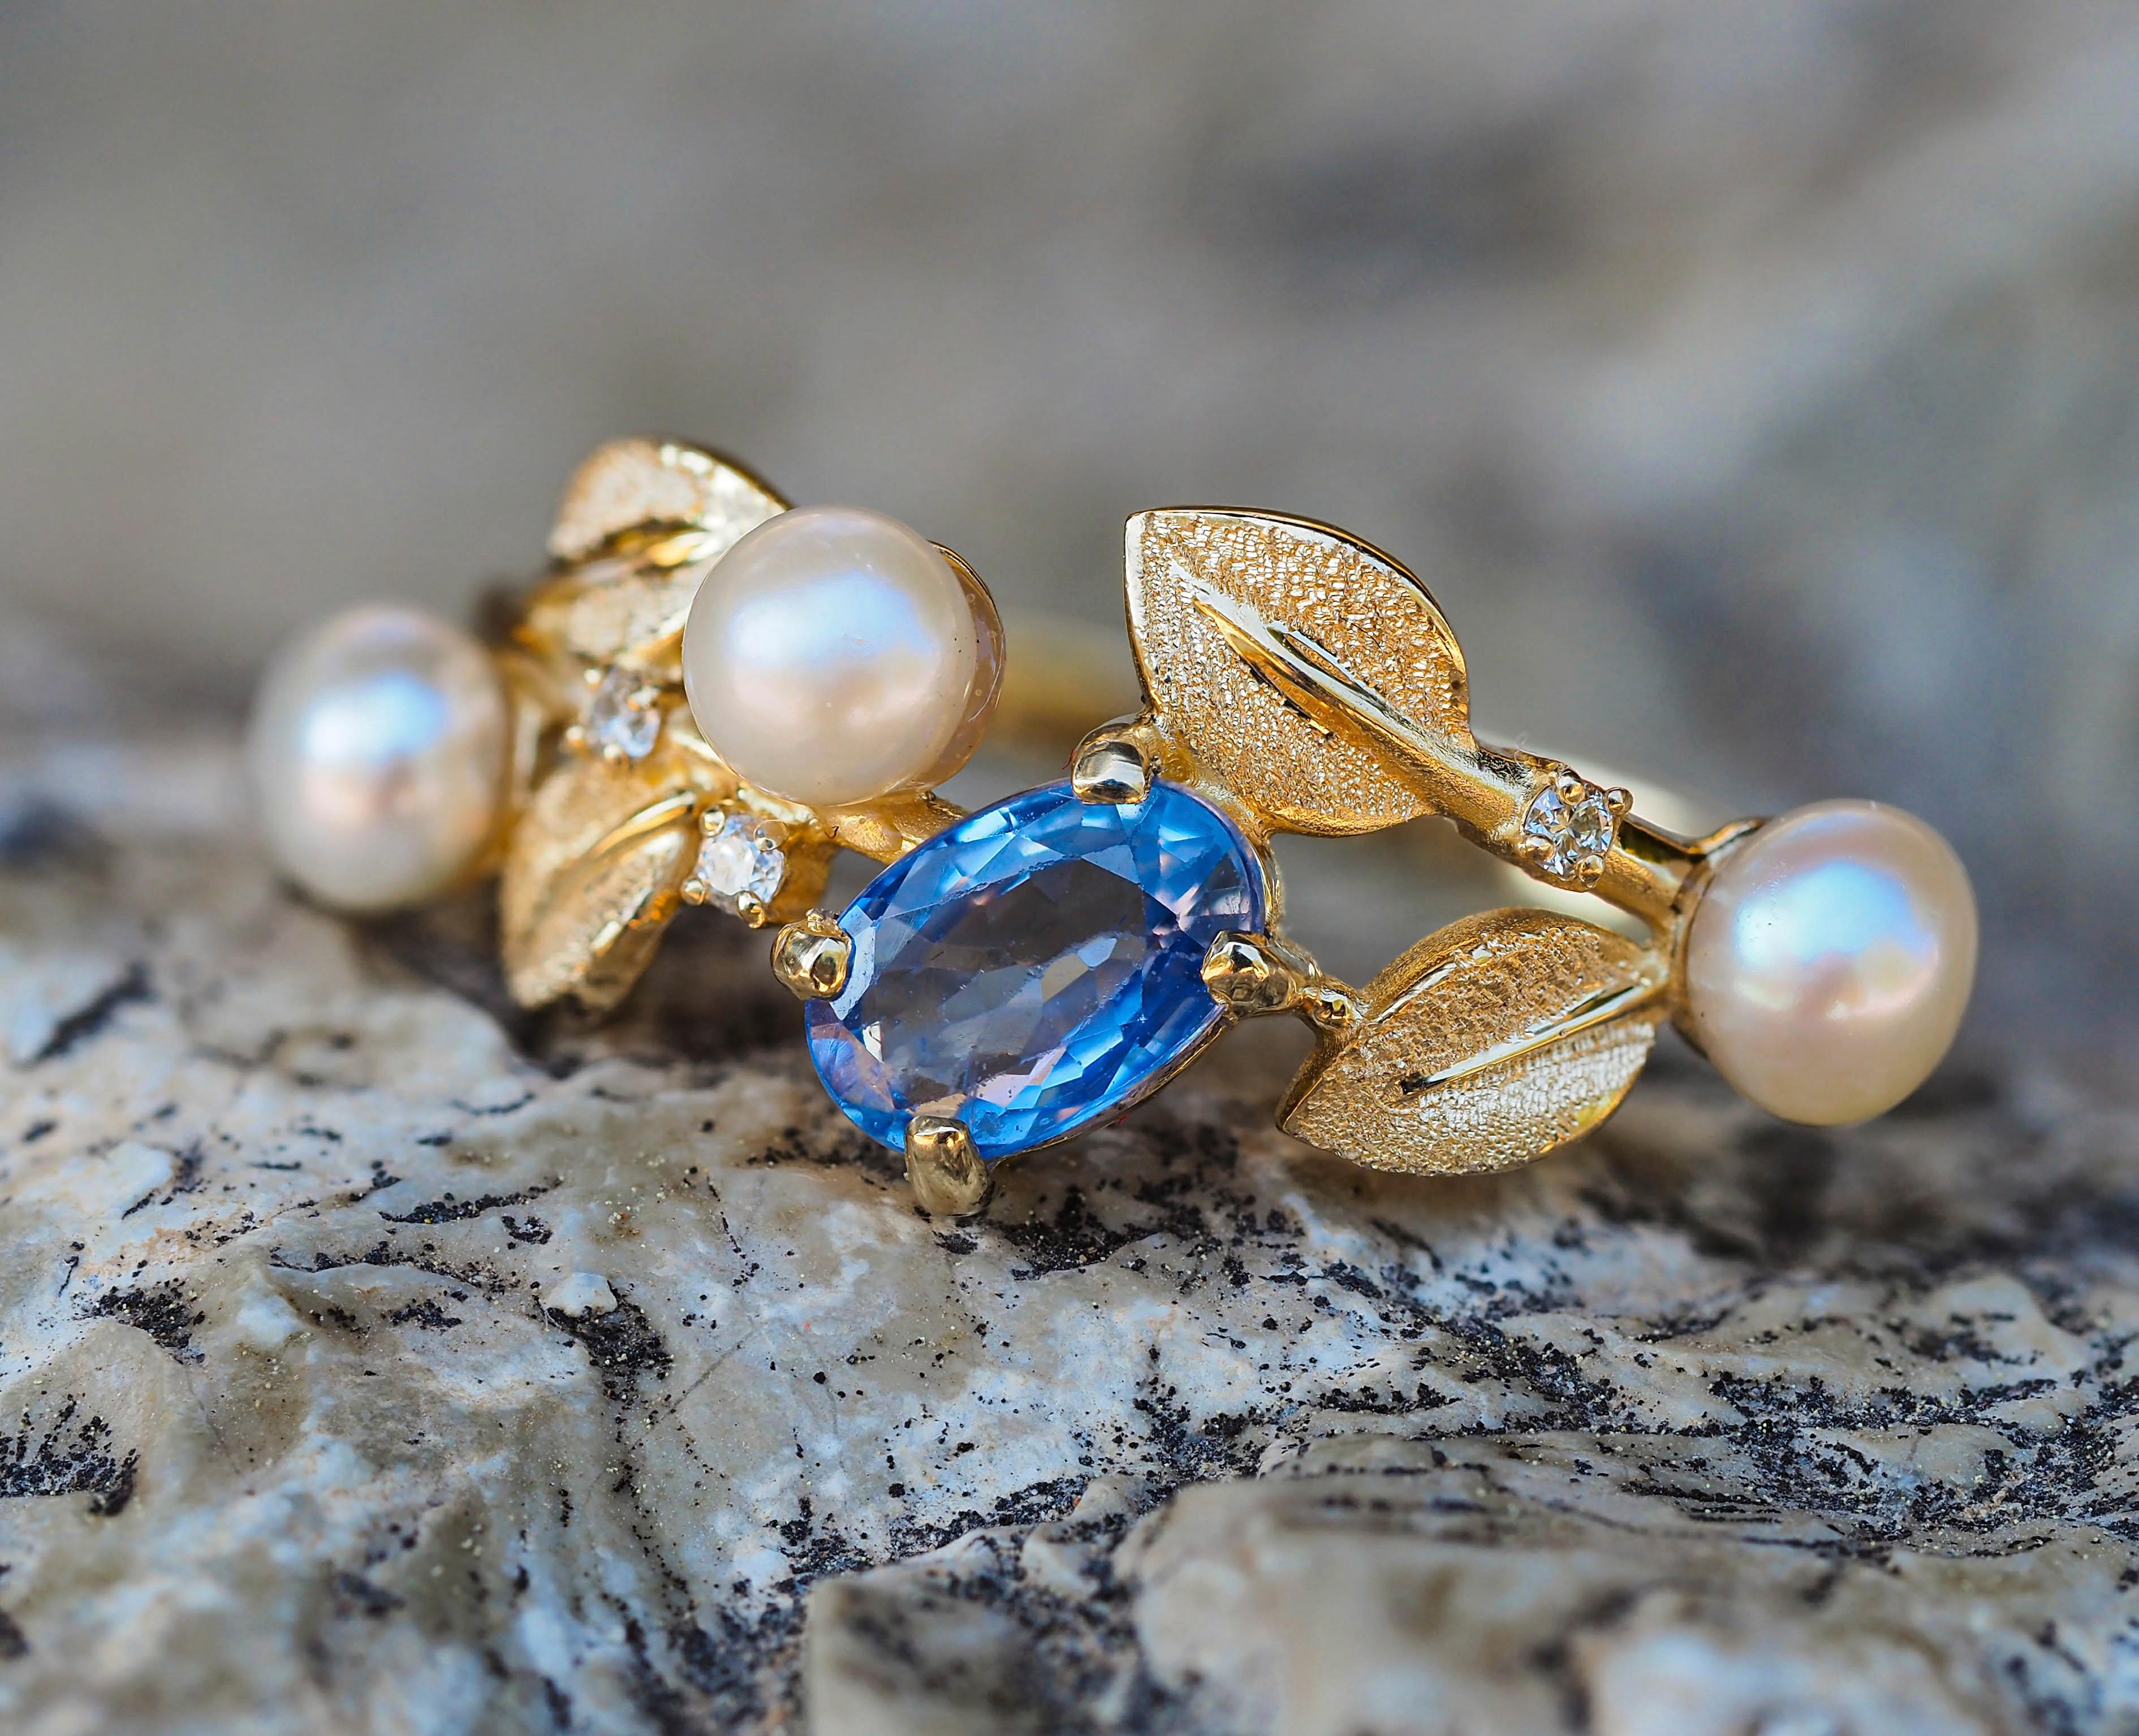 For Sale:  14k Gold Floral Ring with Sapphire, Diamonds and Pearls 8